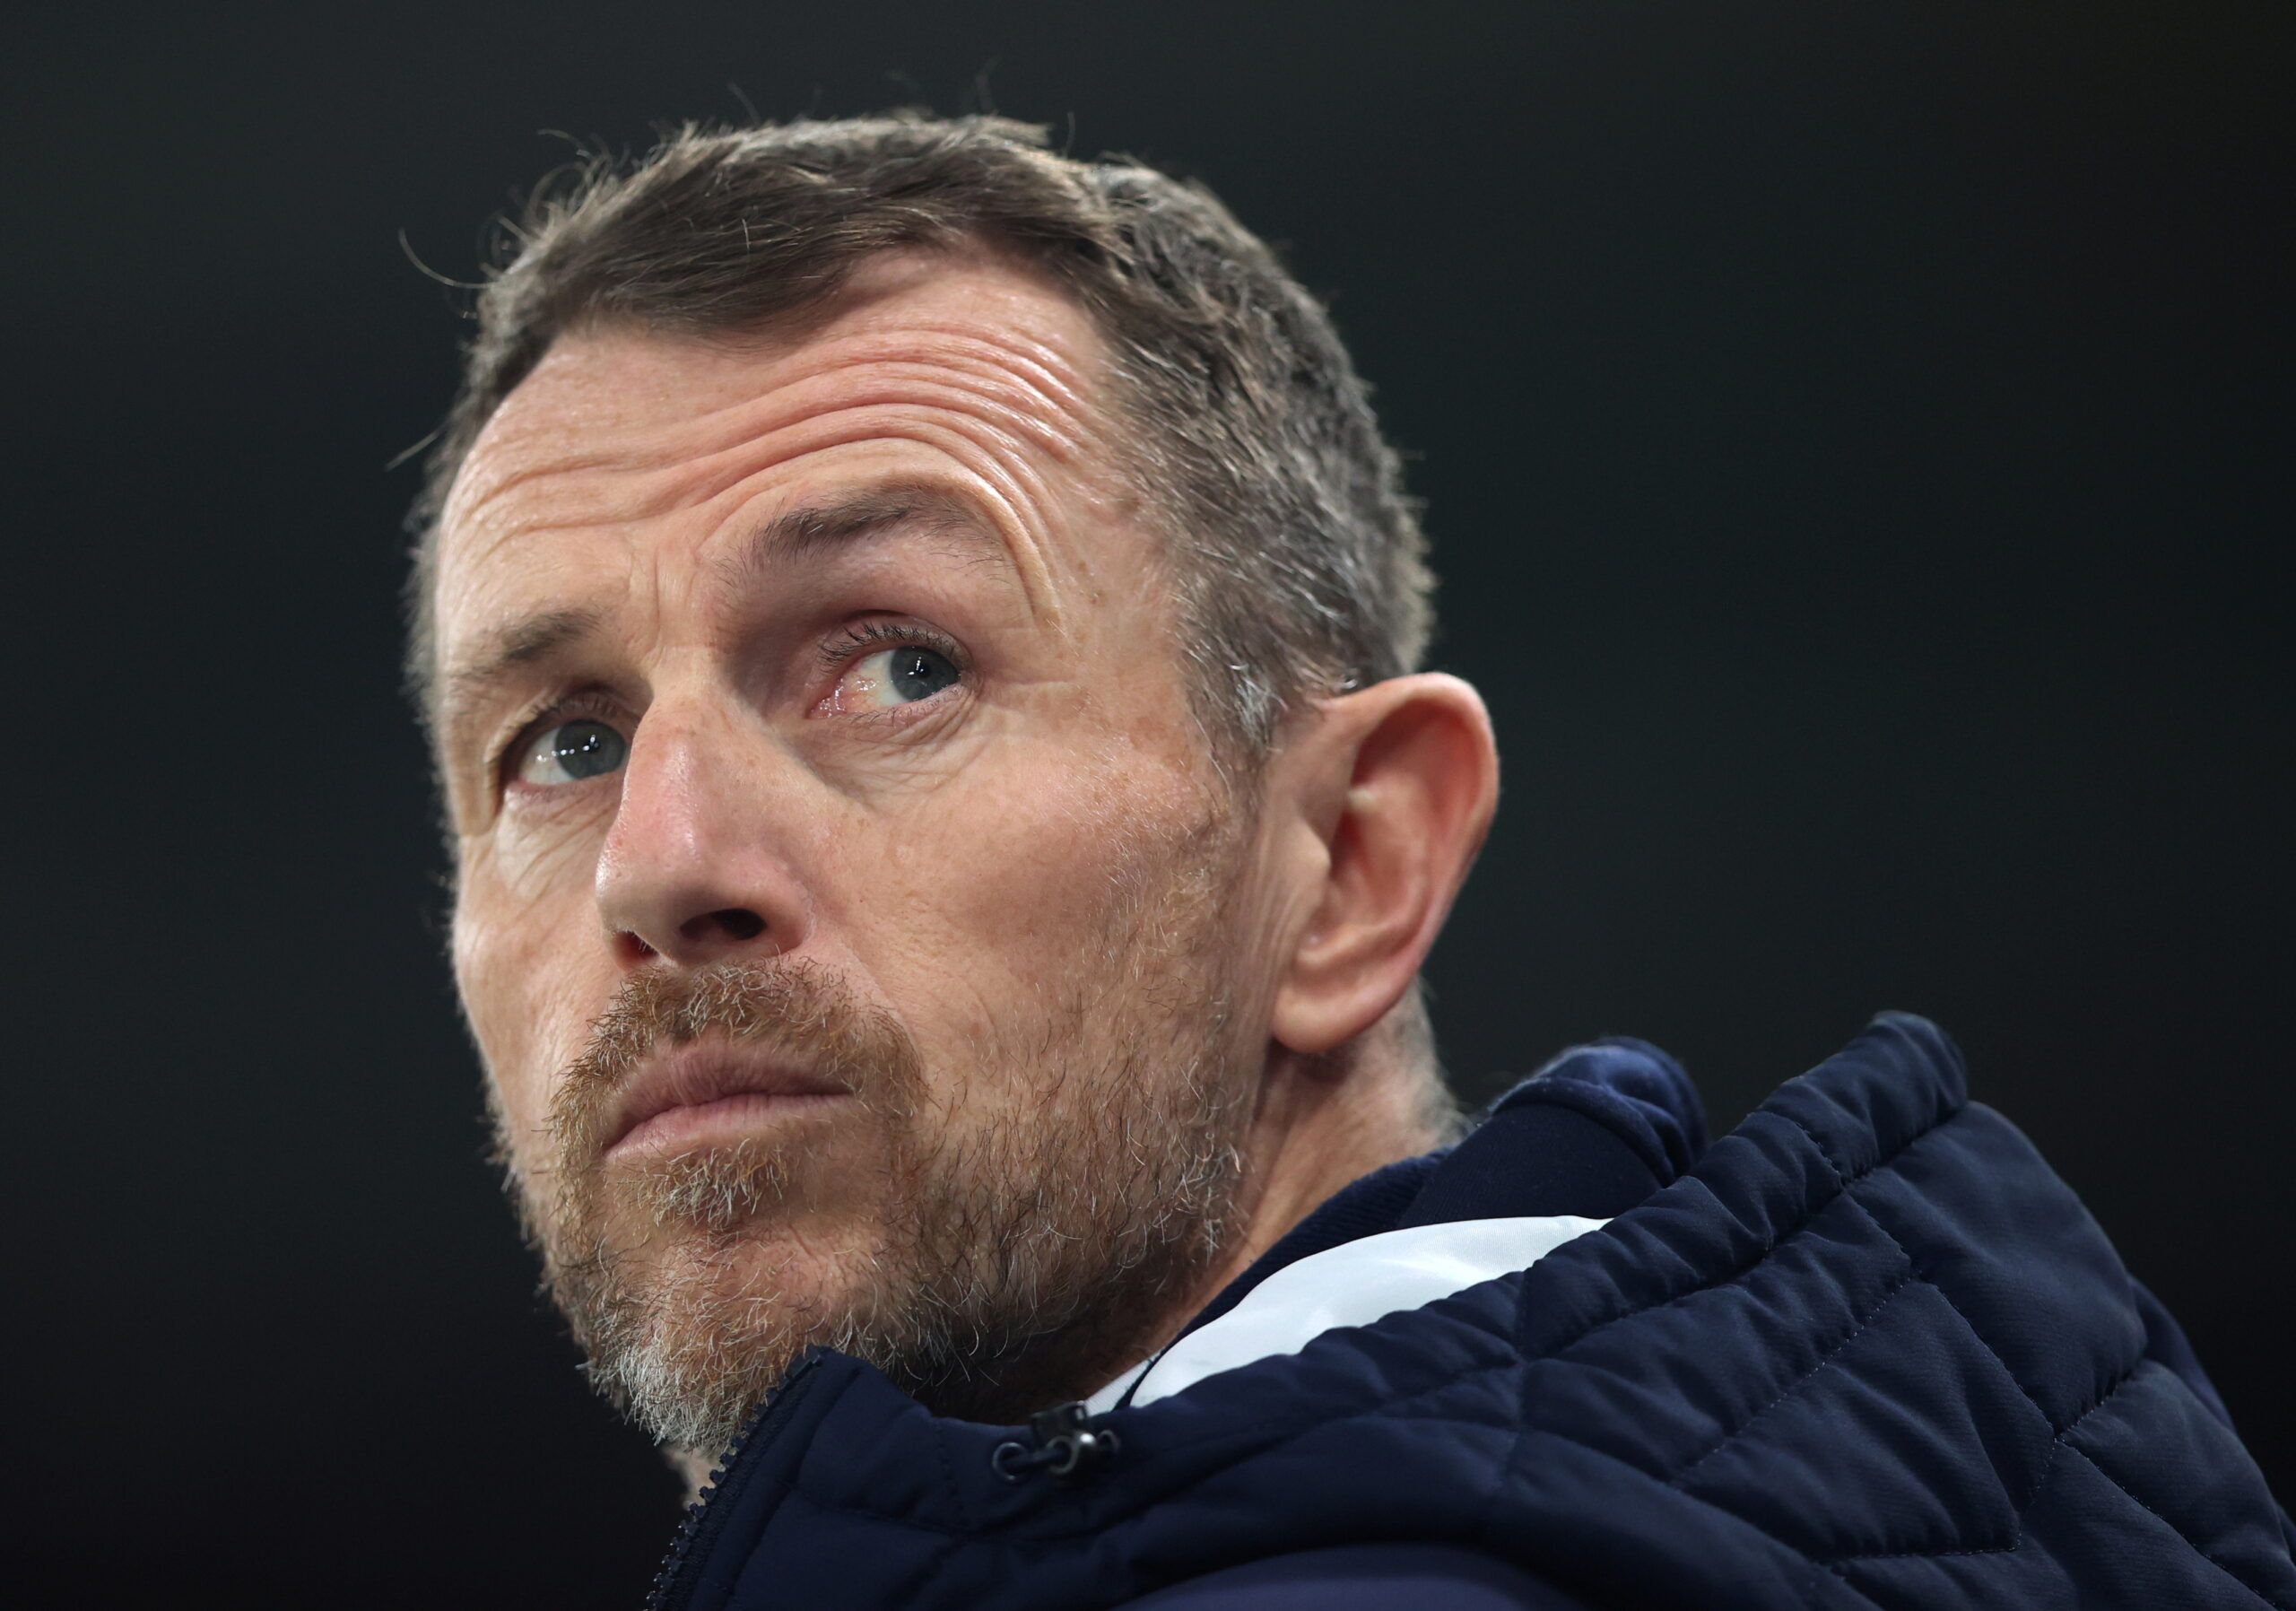 Soccer Football - Championship - Derby County v Millwall - Pride Park, Derby, Britain - February 23, 2022  Millwall manager Gary Rowett Action Images/Molly Darlington